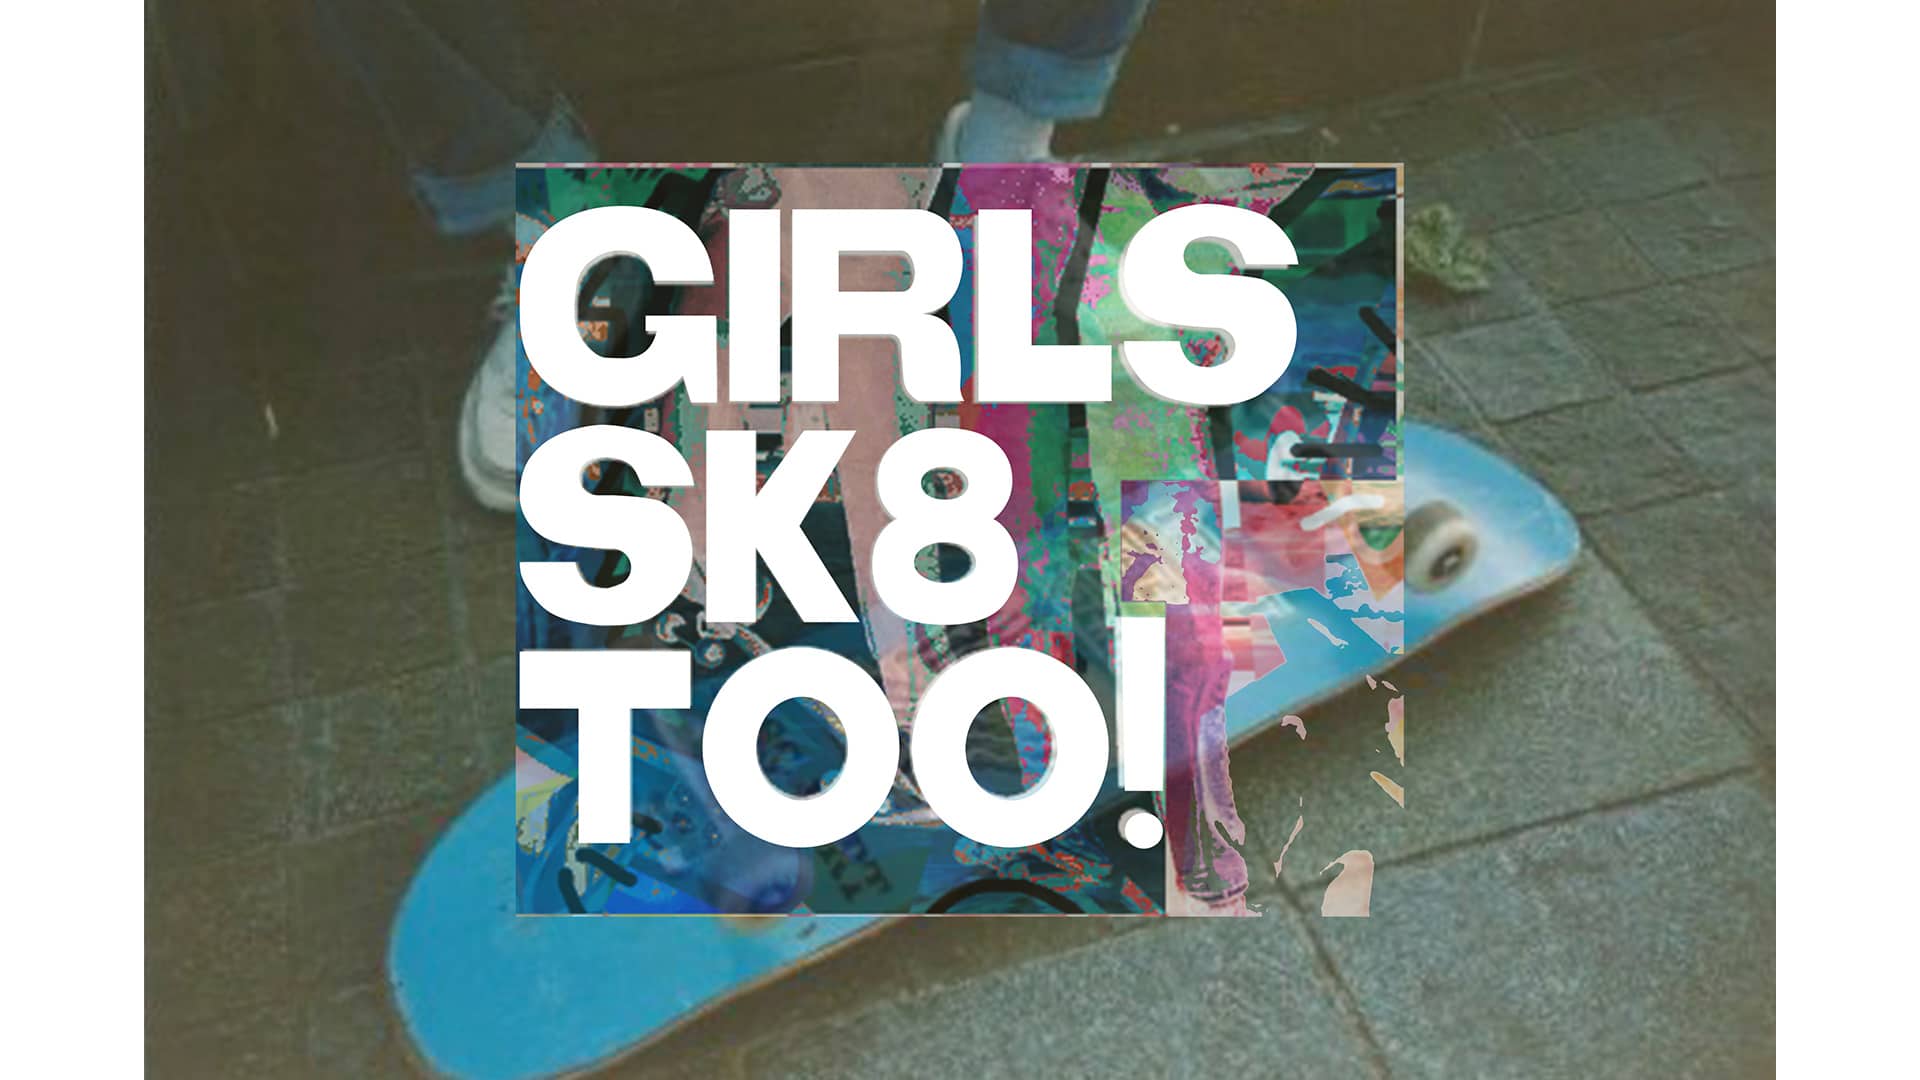 Emily June Kelly: Feminism, Activism, Posters and Skateboarding